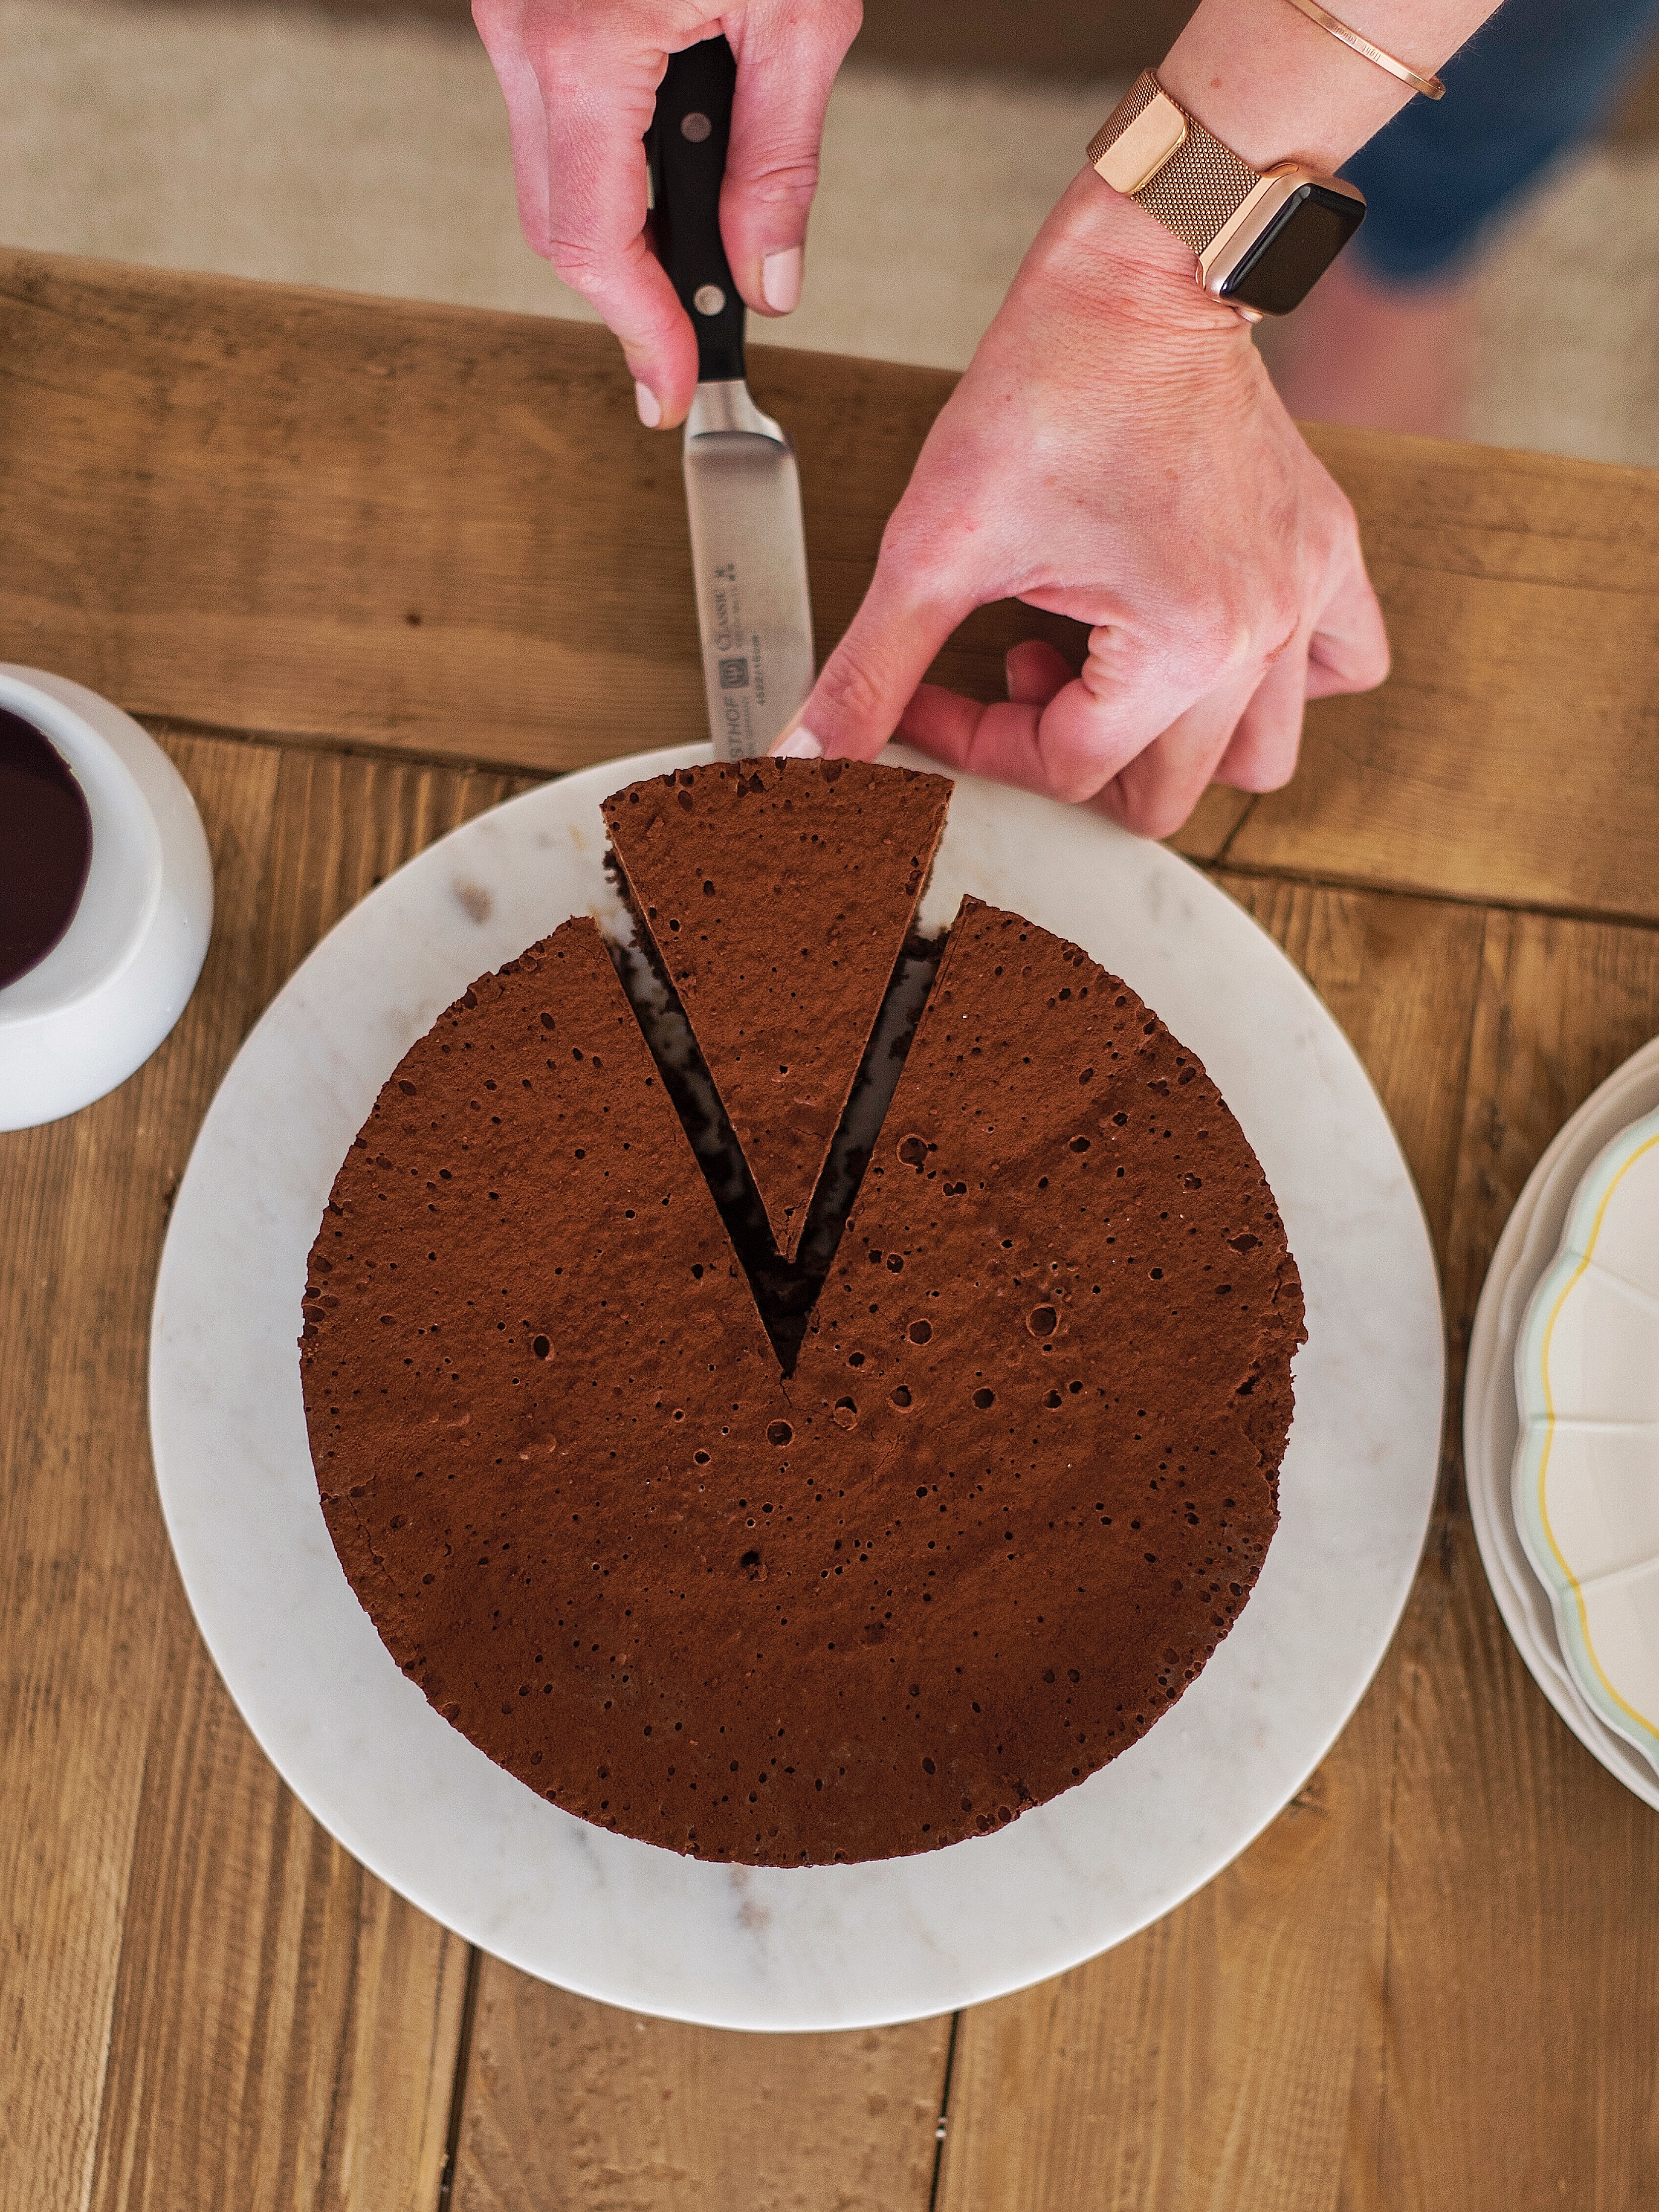 Flourless Chocolate Cake:  a rich, decadent chocolate cake, made with just 7 ingredients! #cakebycourtney #cake #flourlesschocolatecake #cakes #chocolatecake #easychocolatecakerecipe #flourlesschocolatecakerecipe